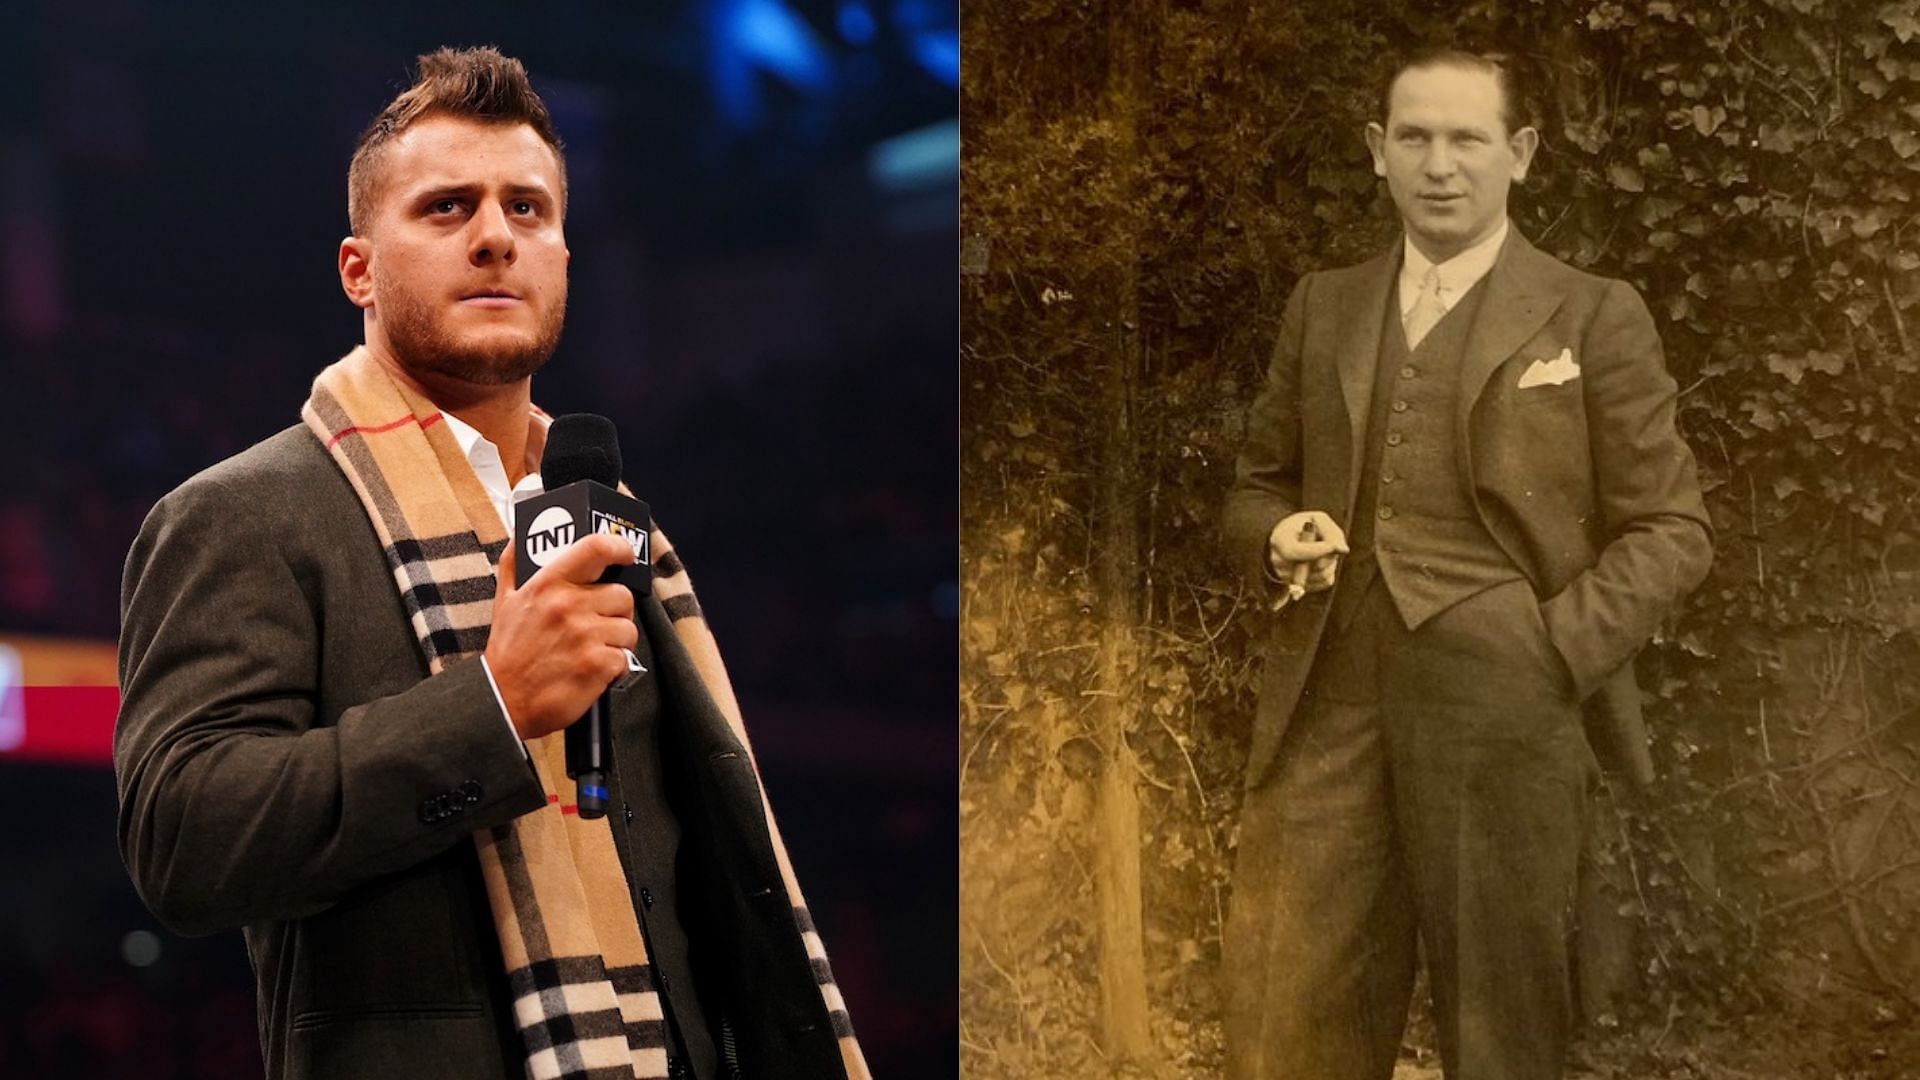 AEW star MJF comes from a wealthy lineage